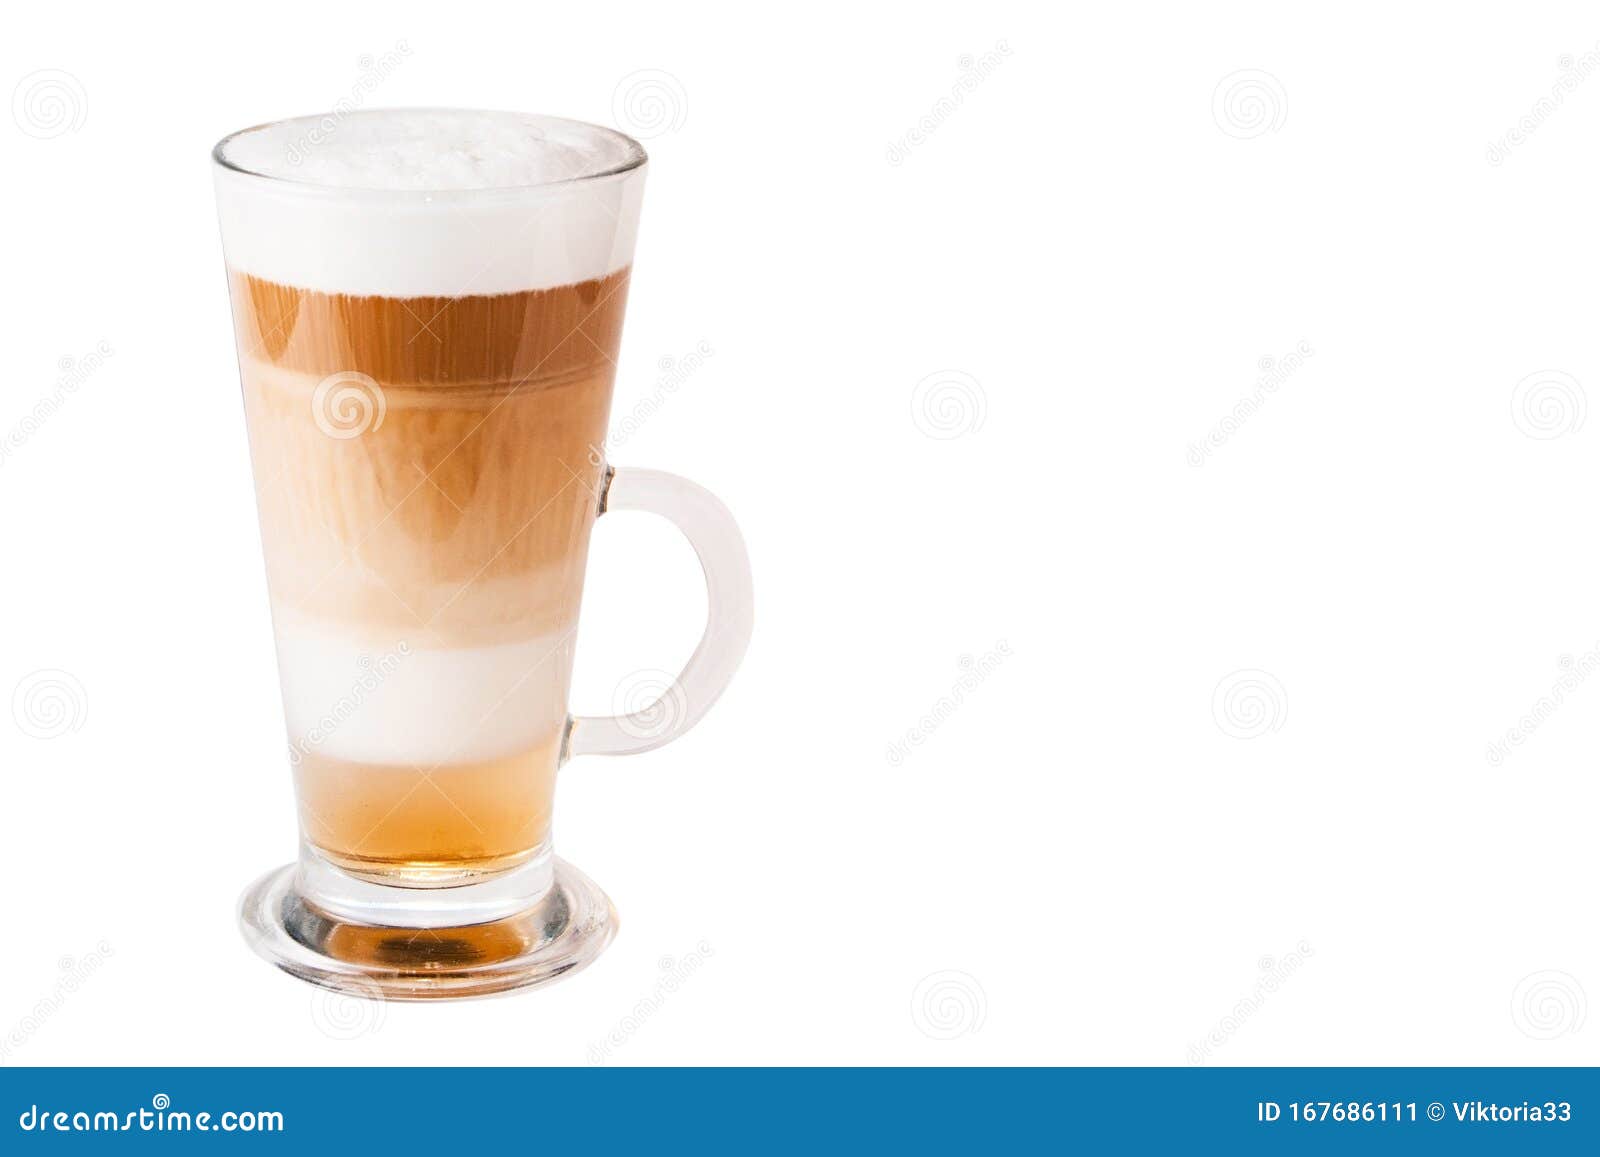 latte coffee  on white in a glass in layers